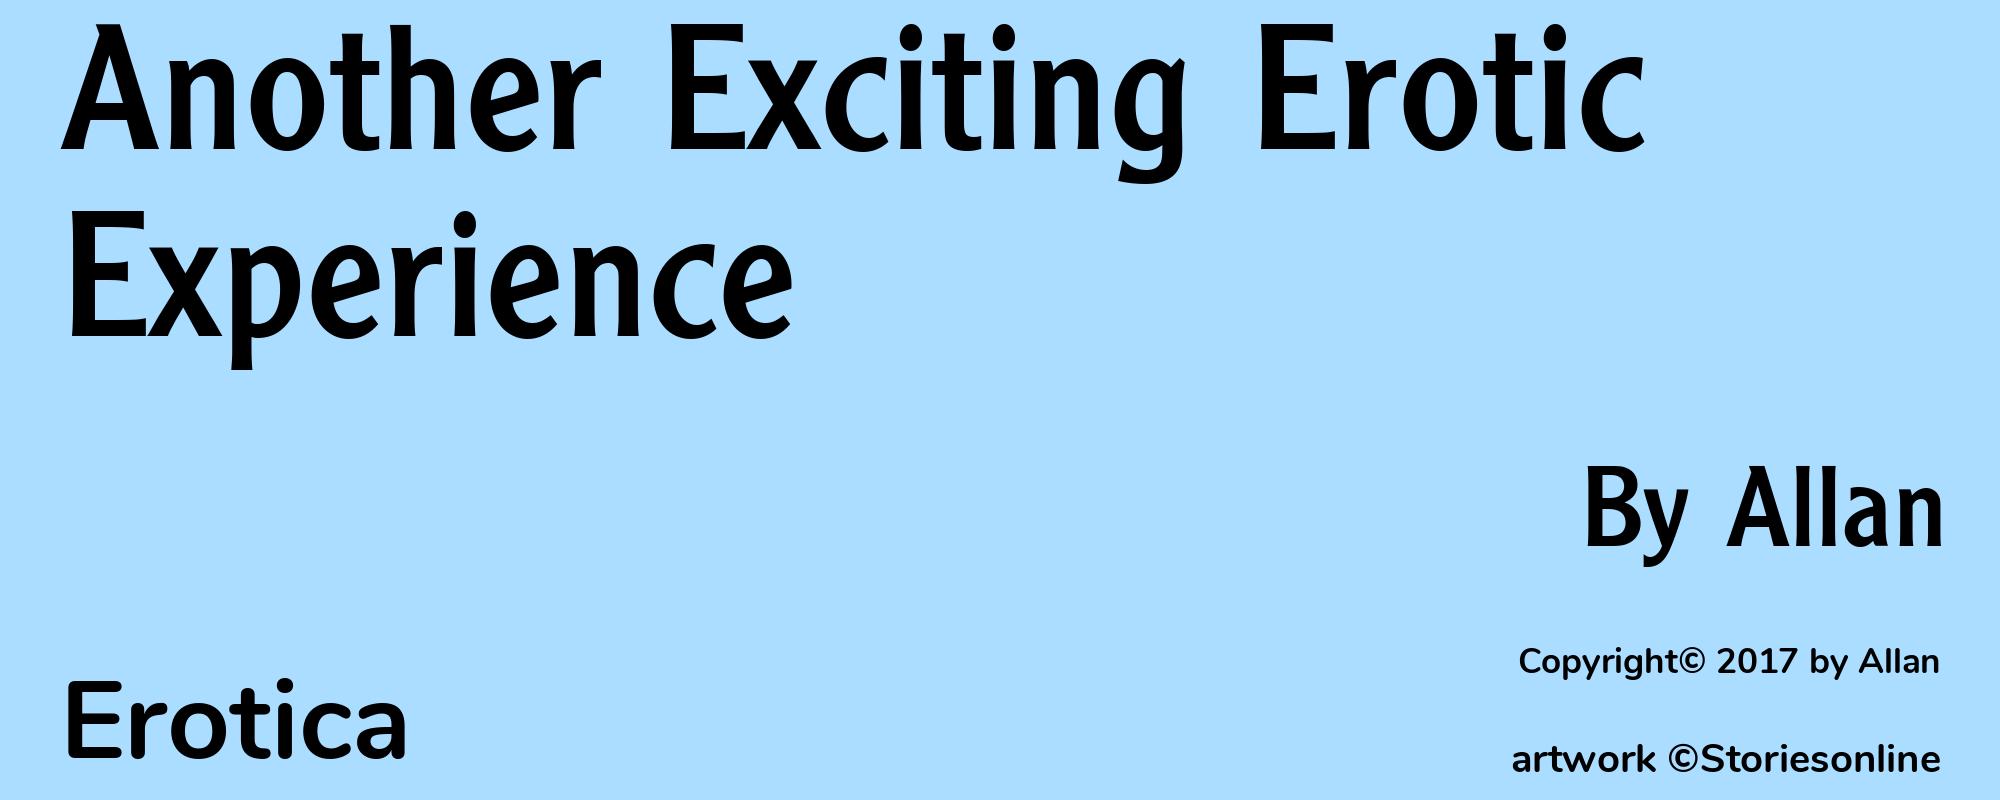 Another Exciting Erotic Experience - Cover